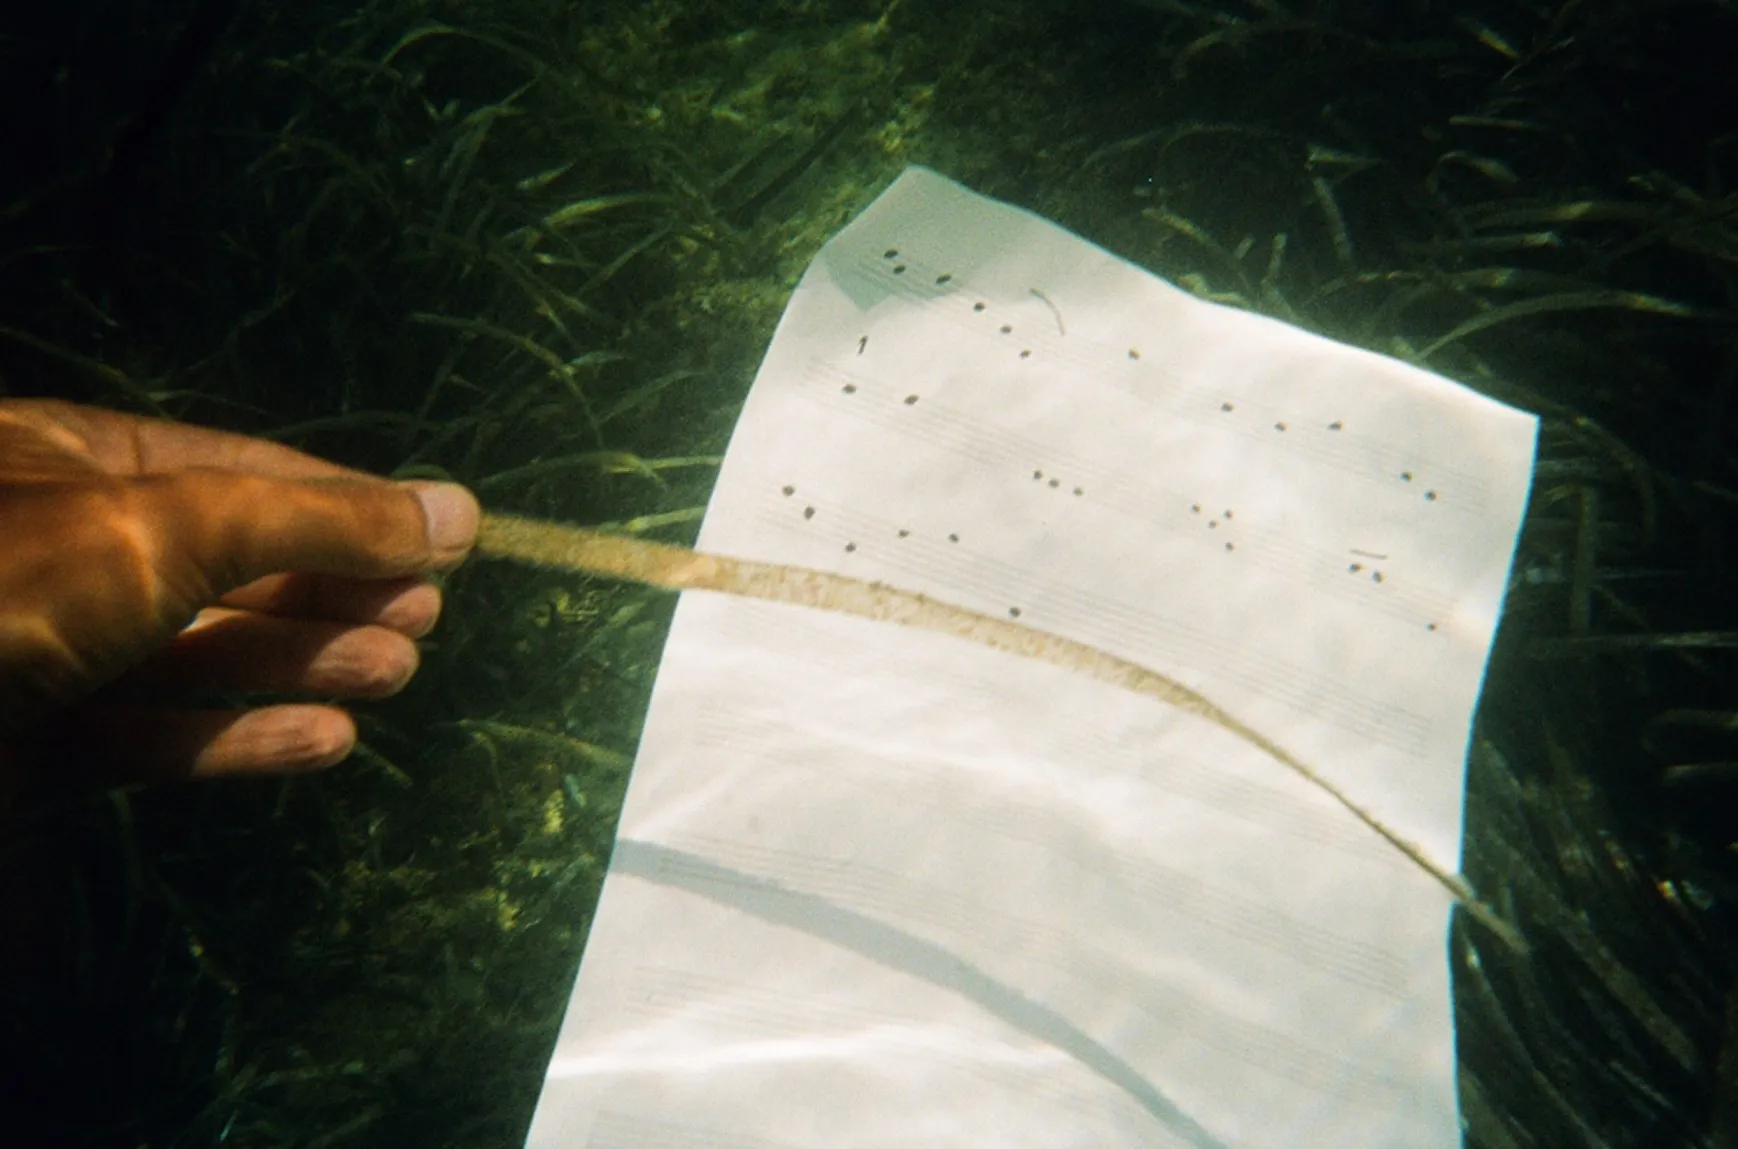 Underwater picture of a paper with musical score, a hand holding a piece of algae, surrounded by green seaweed